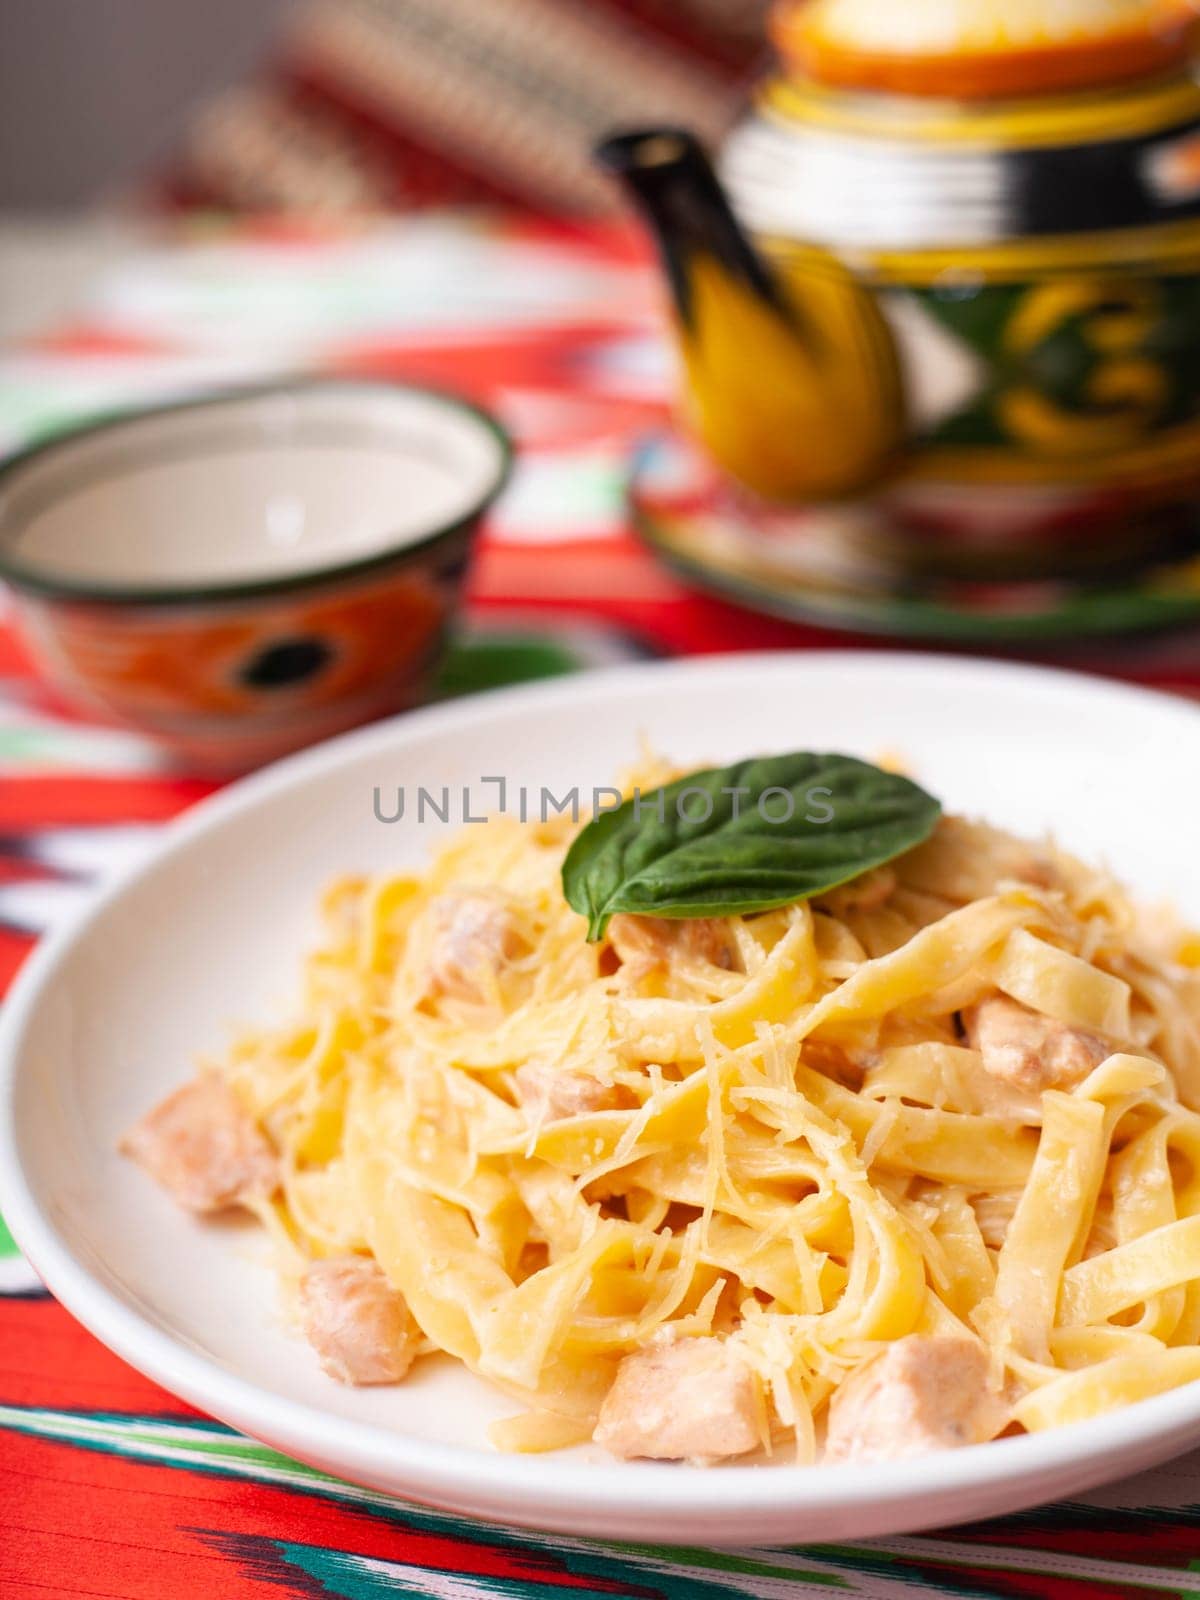 creamy pasta with chicken, basil and mushrooms, according to the Italian recipe. East style by tewolf